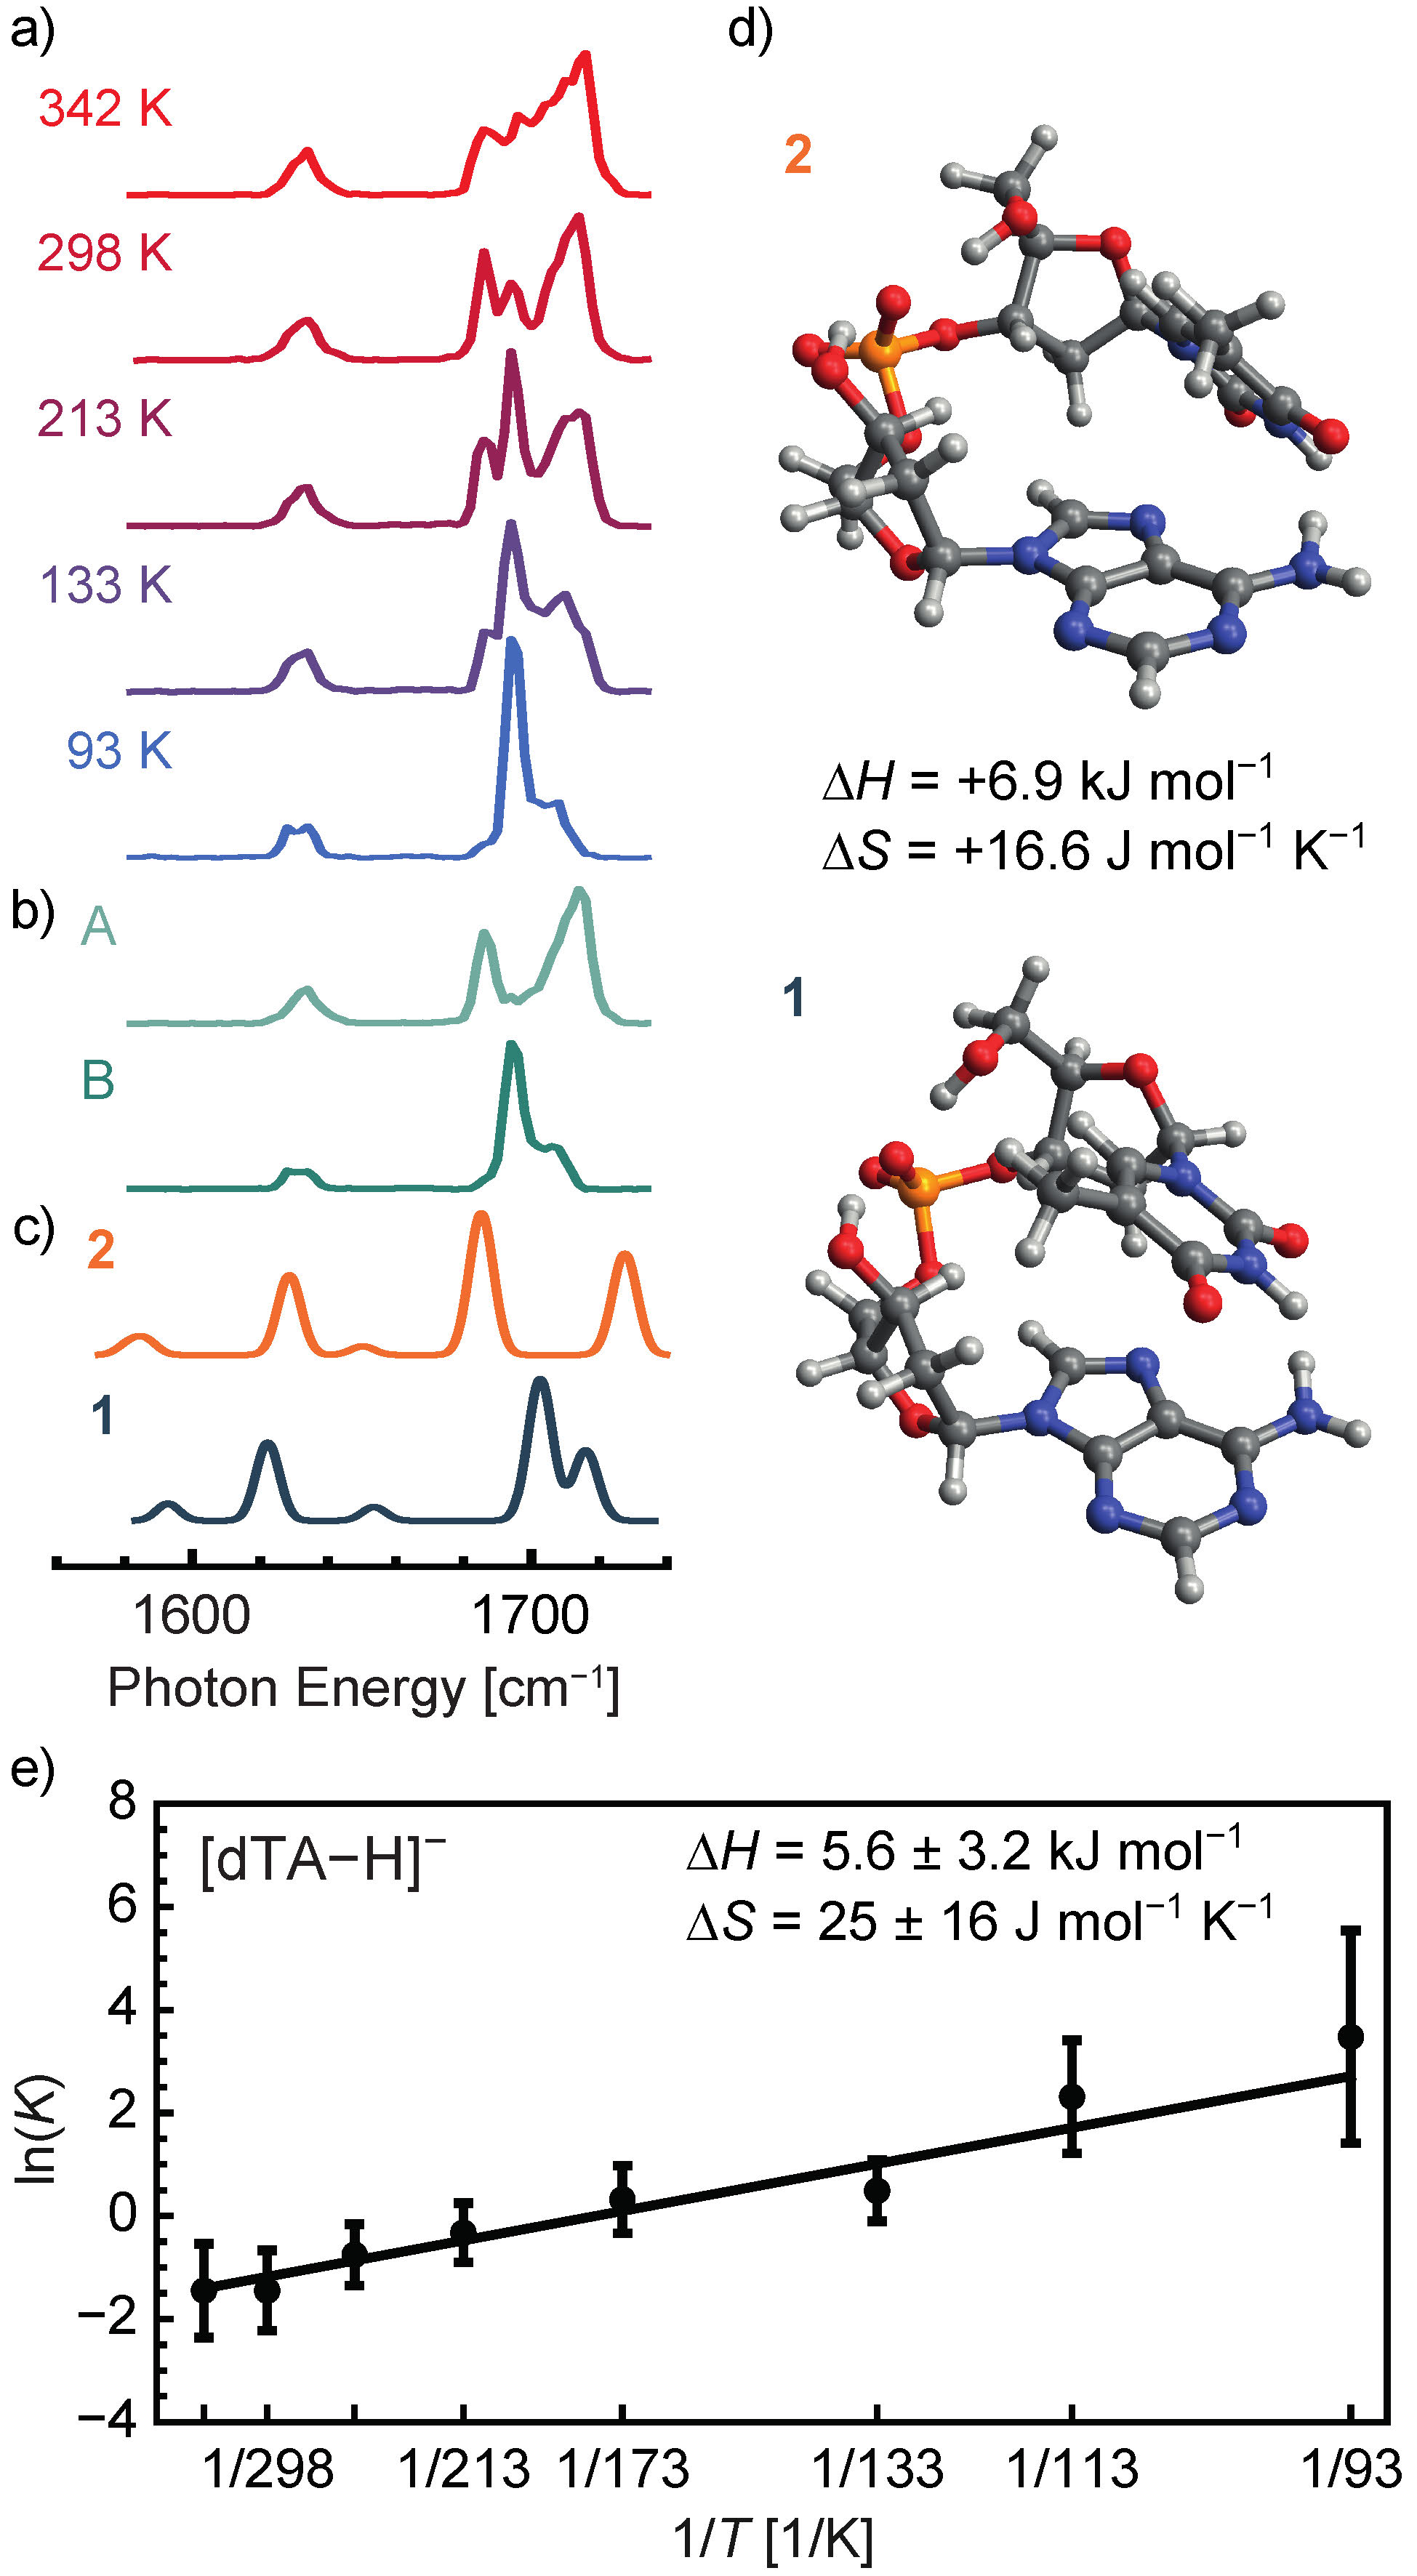 Figure 2. Helium nanodroplet infrared action spectroscopy of the dinucleotide anion [dTA−H]− for the experimental determination of conformational thermochemistry. Shown in (a) are IR spectra collected with varying ion temperature prior to pickup. Component spectra identified by non-negative matrix factorization (NMF) are shown in (b), and computed harmonic spectra of the low-energy structures (panel d) are shown in (c). A Van ‘t Hoff plot constructed from the population of each component at a given temperature is shown in (e). Adapted from https://doi.org/10.1039/D0CP02482A